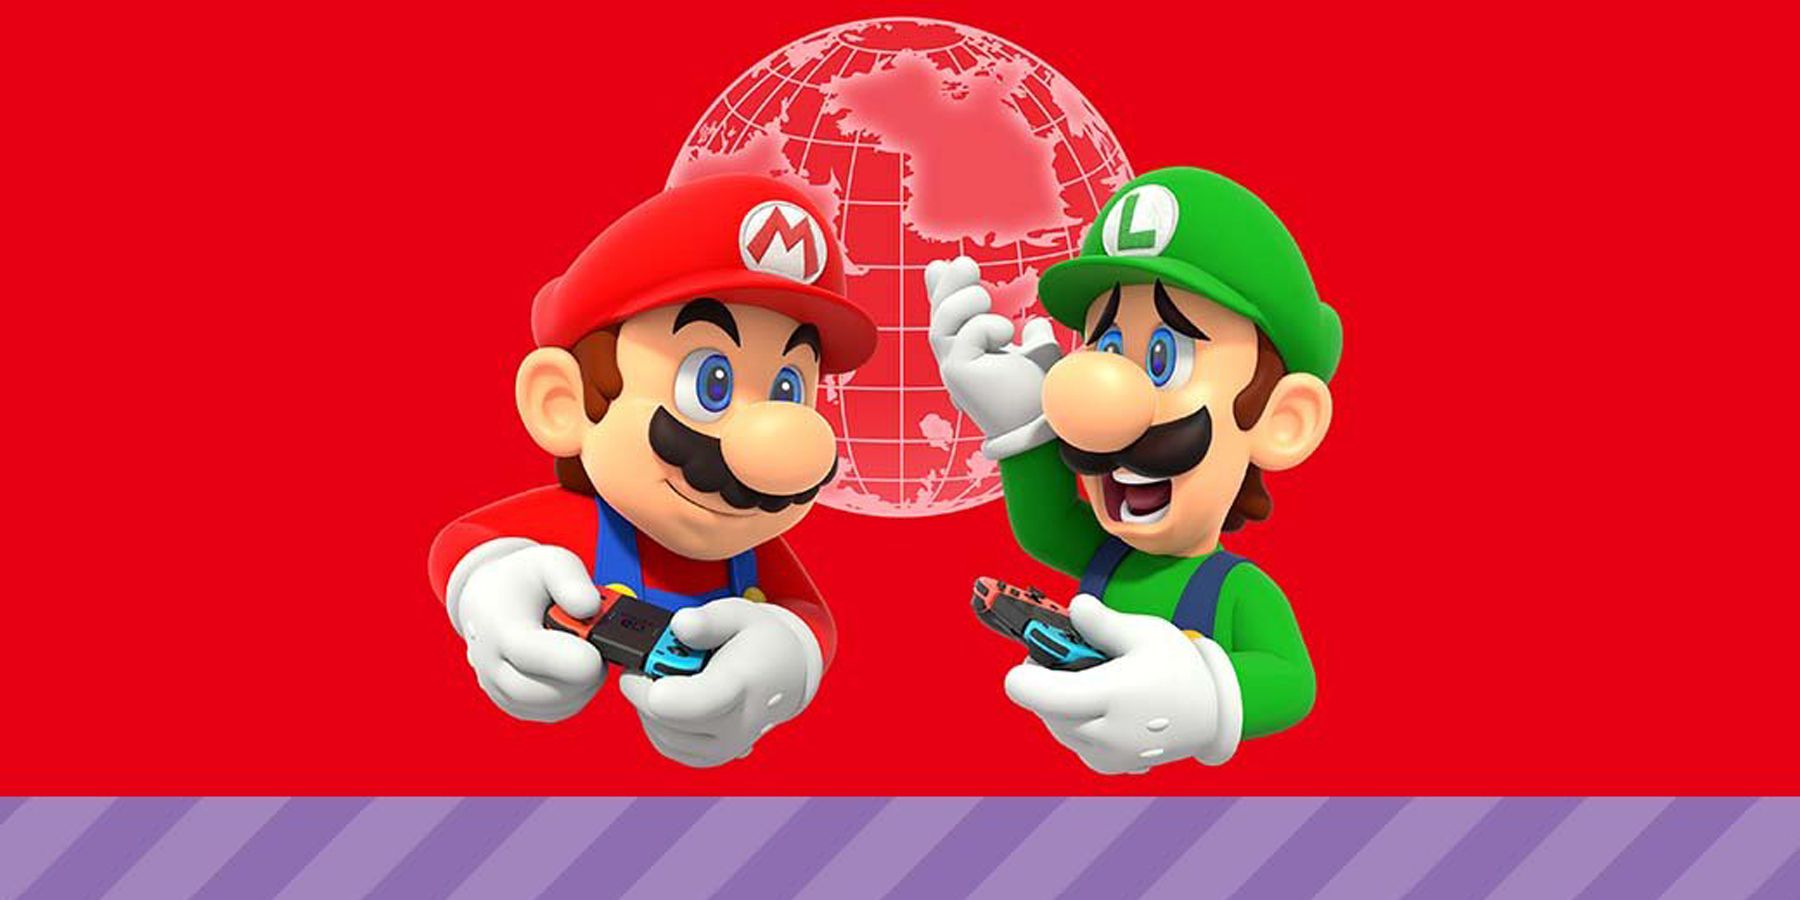 Nintendo Switch Online Adds Three Super Mario Games to Expansion Pack